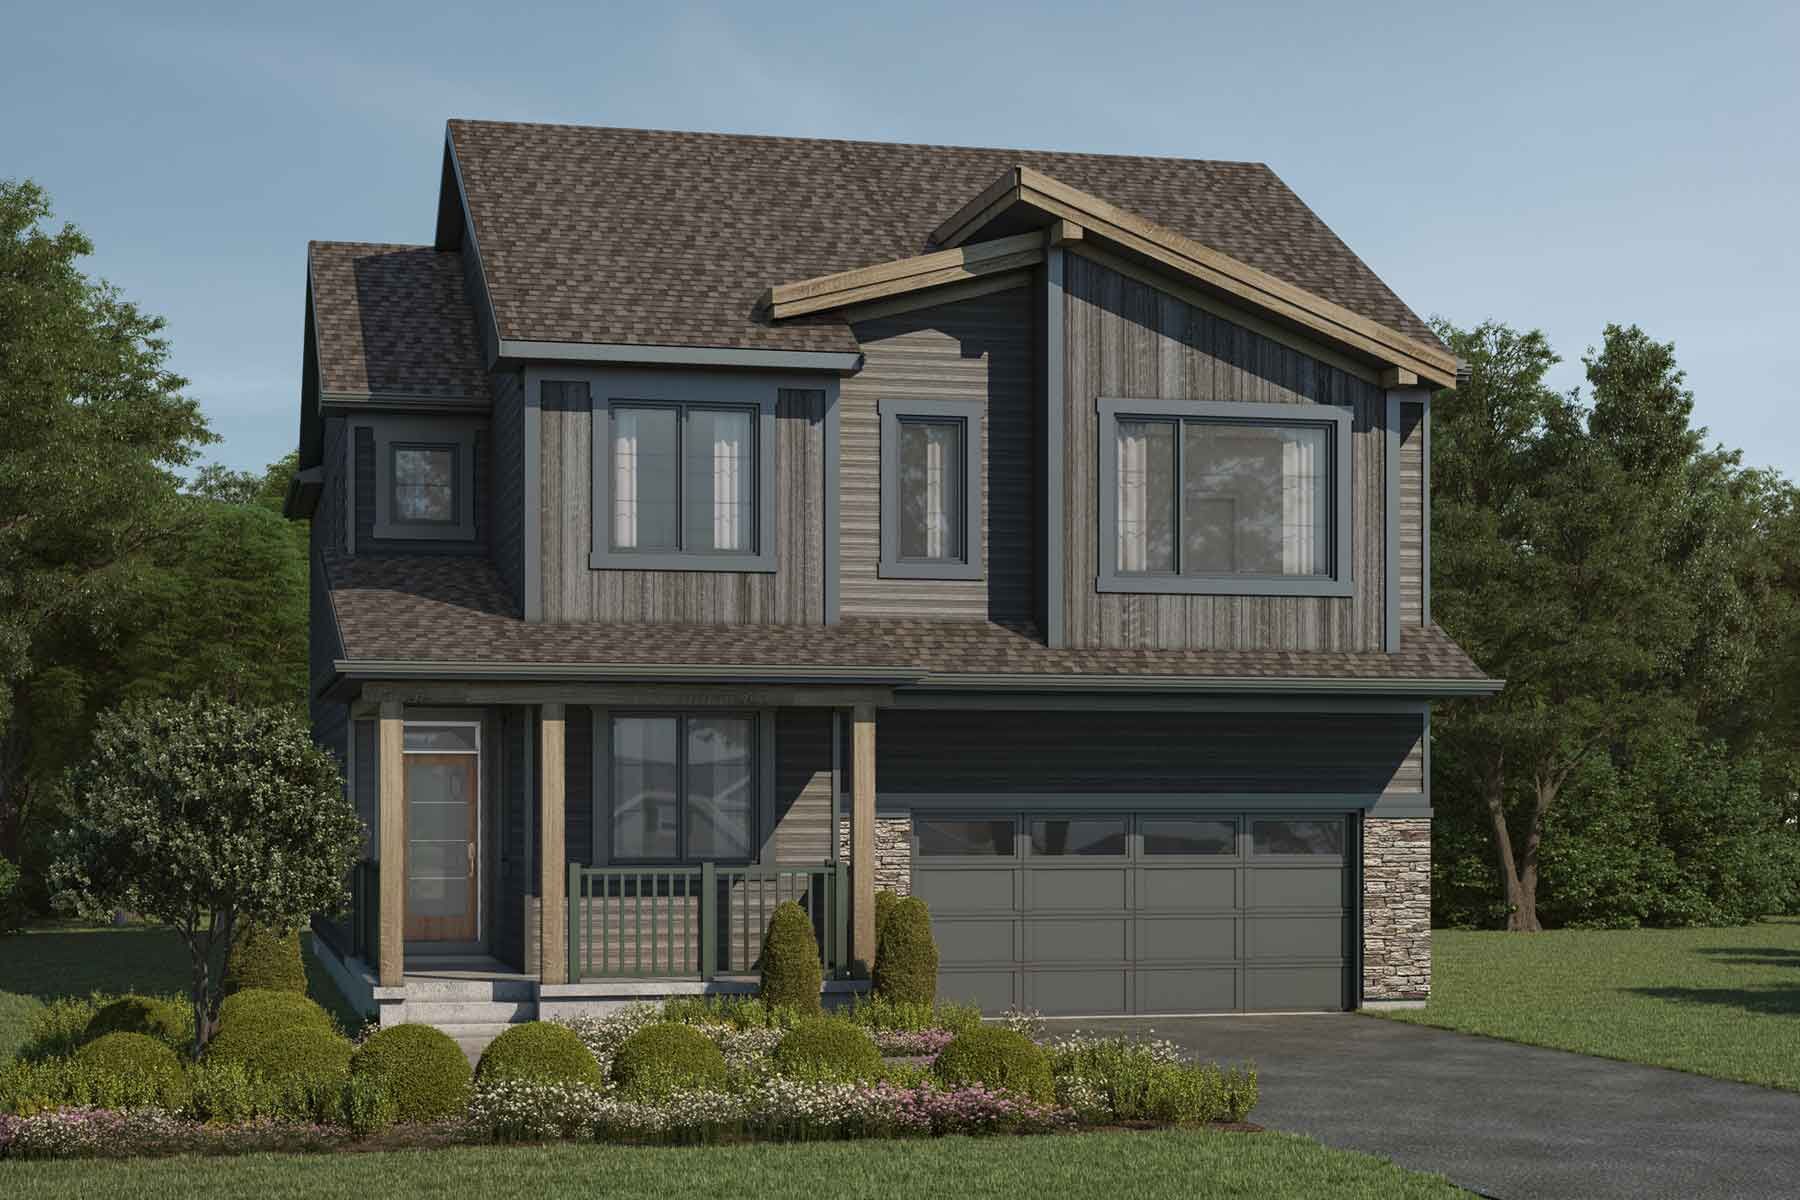 A Mountain Contemporary style detached home with a double car garage.